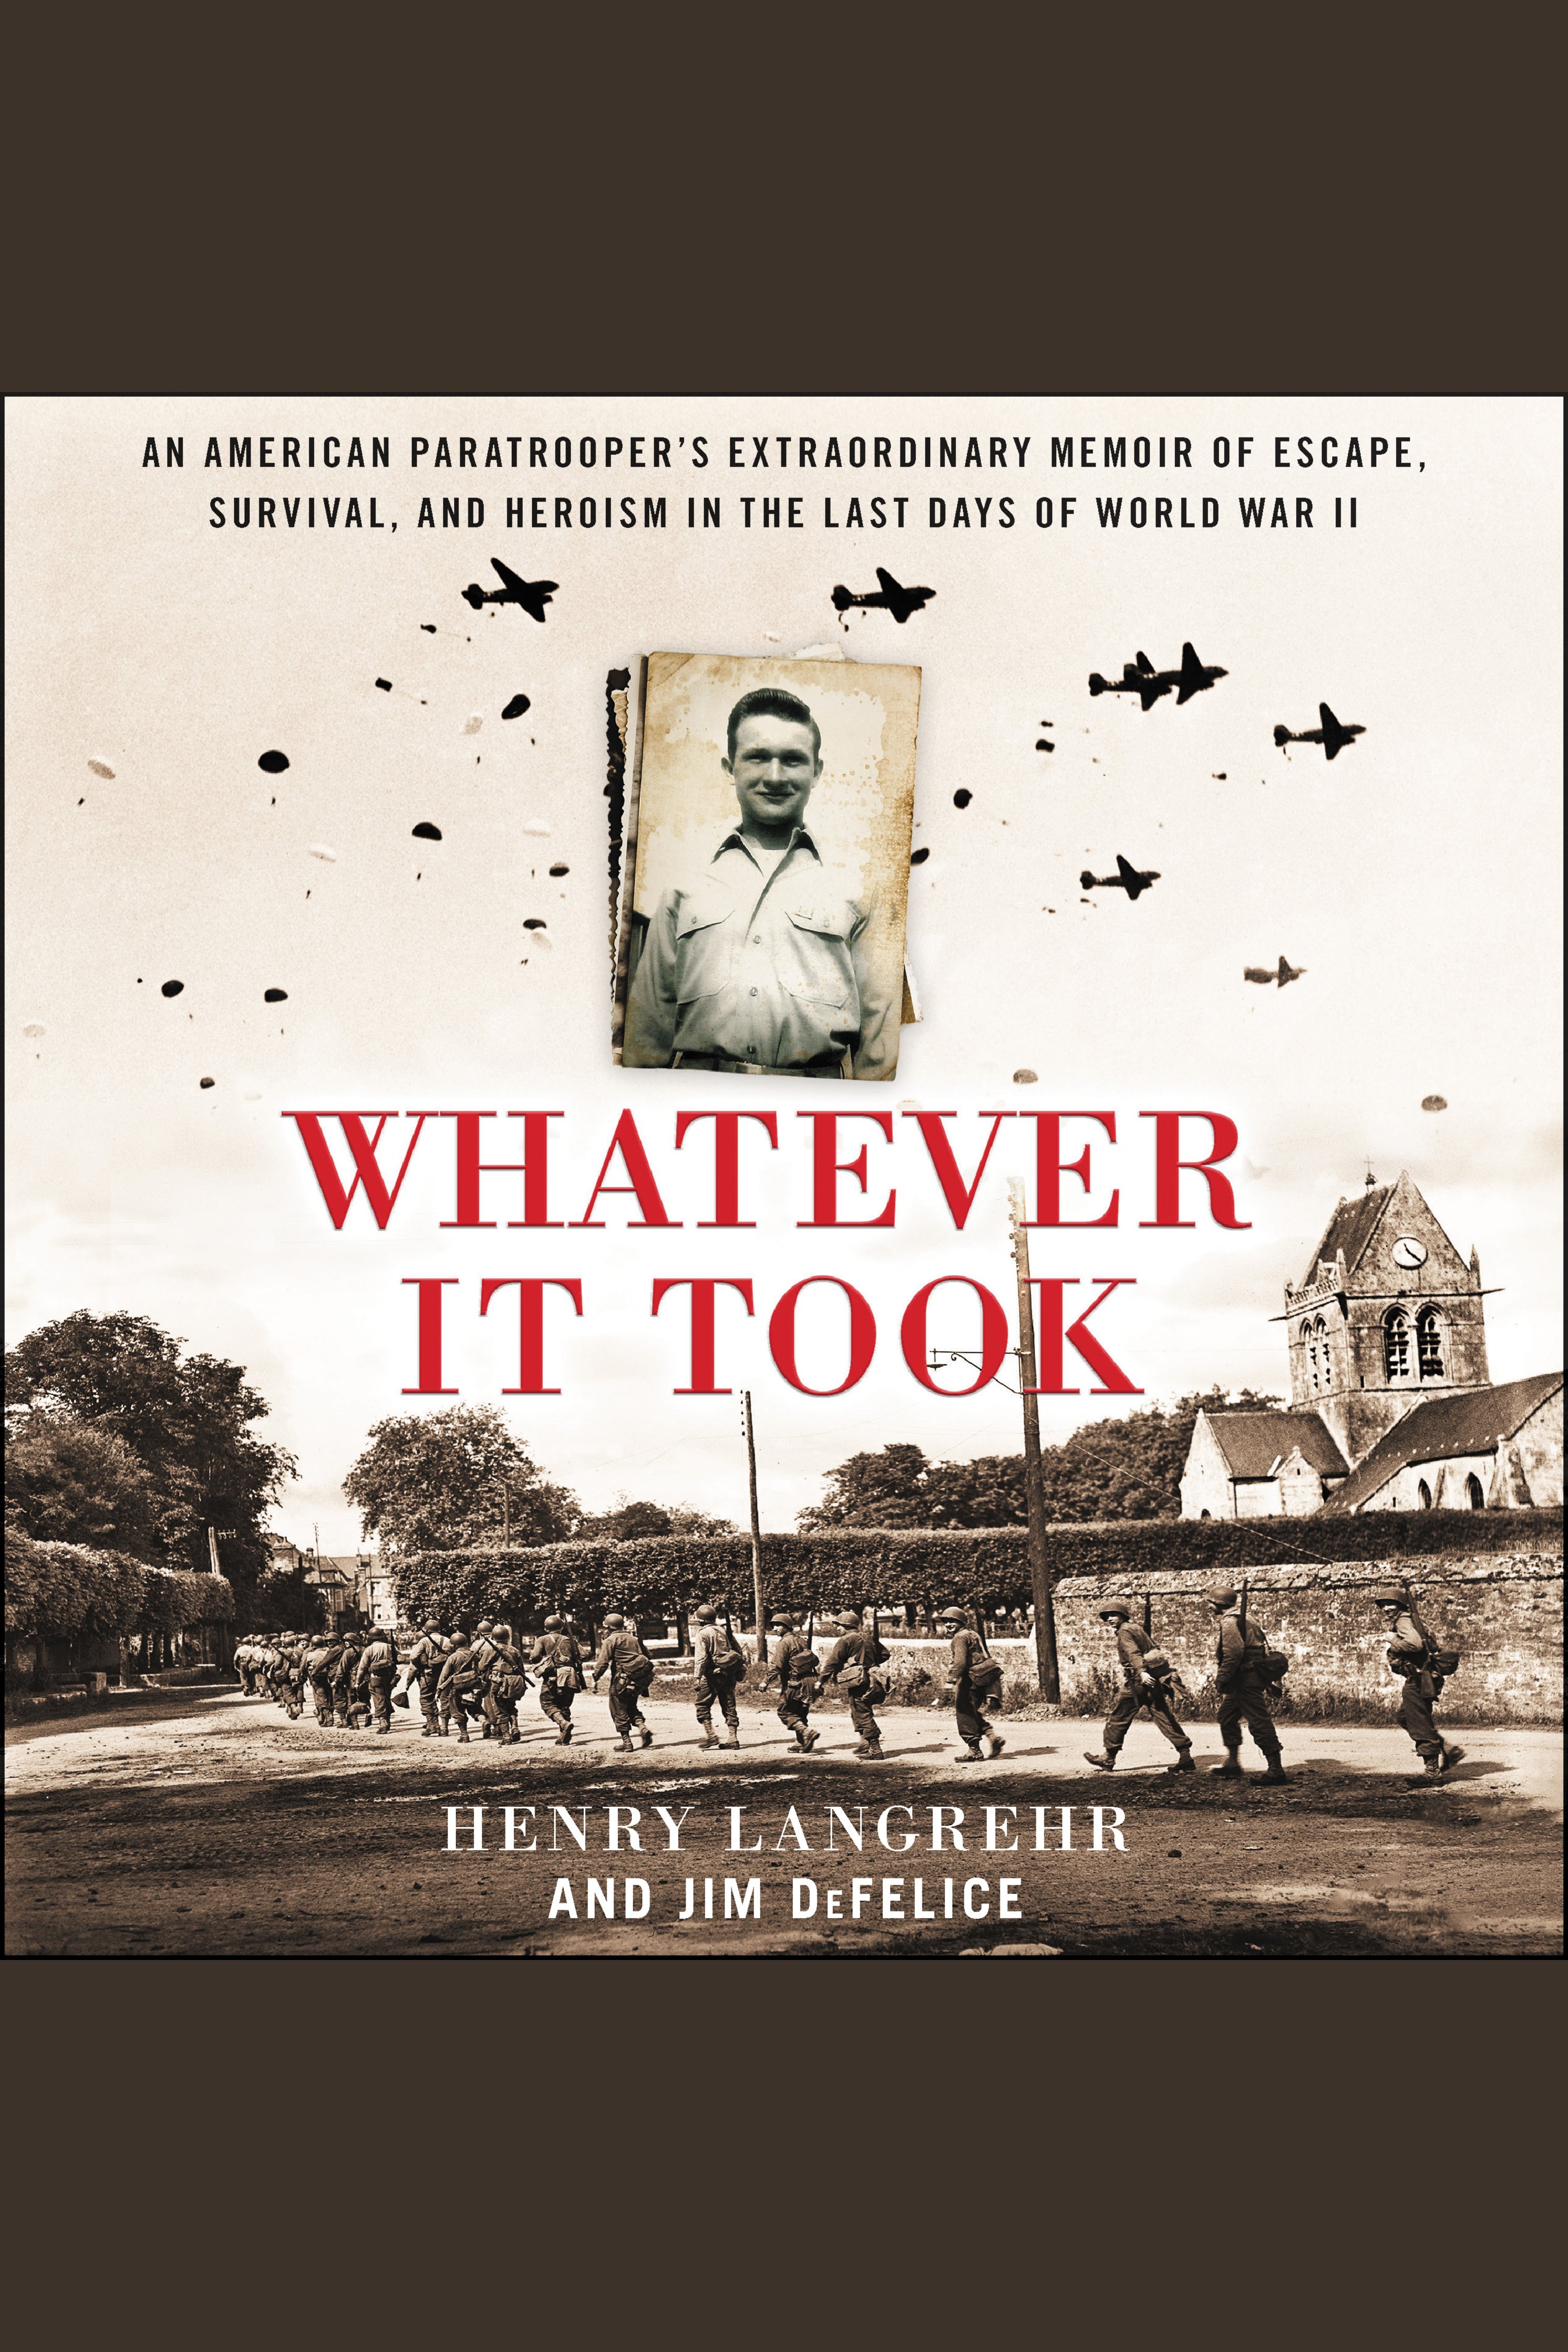 Whatever It Took An American Paratrooper's Extraordinary Memoir of Escape, Survival, and Heroism in the Last Days of World War II cover image